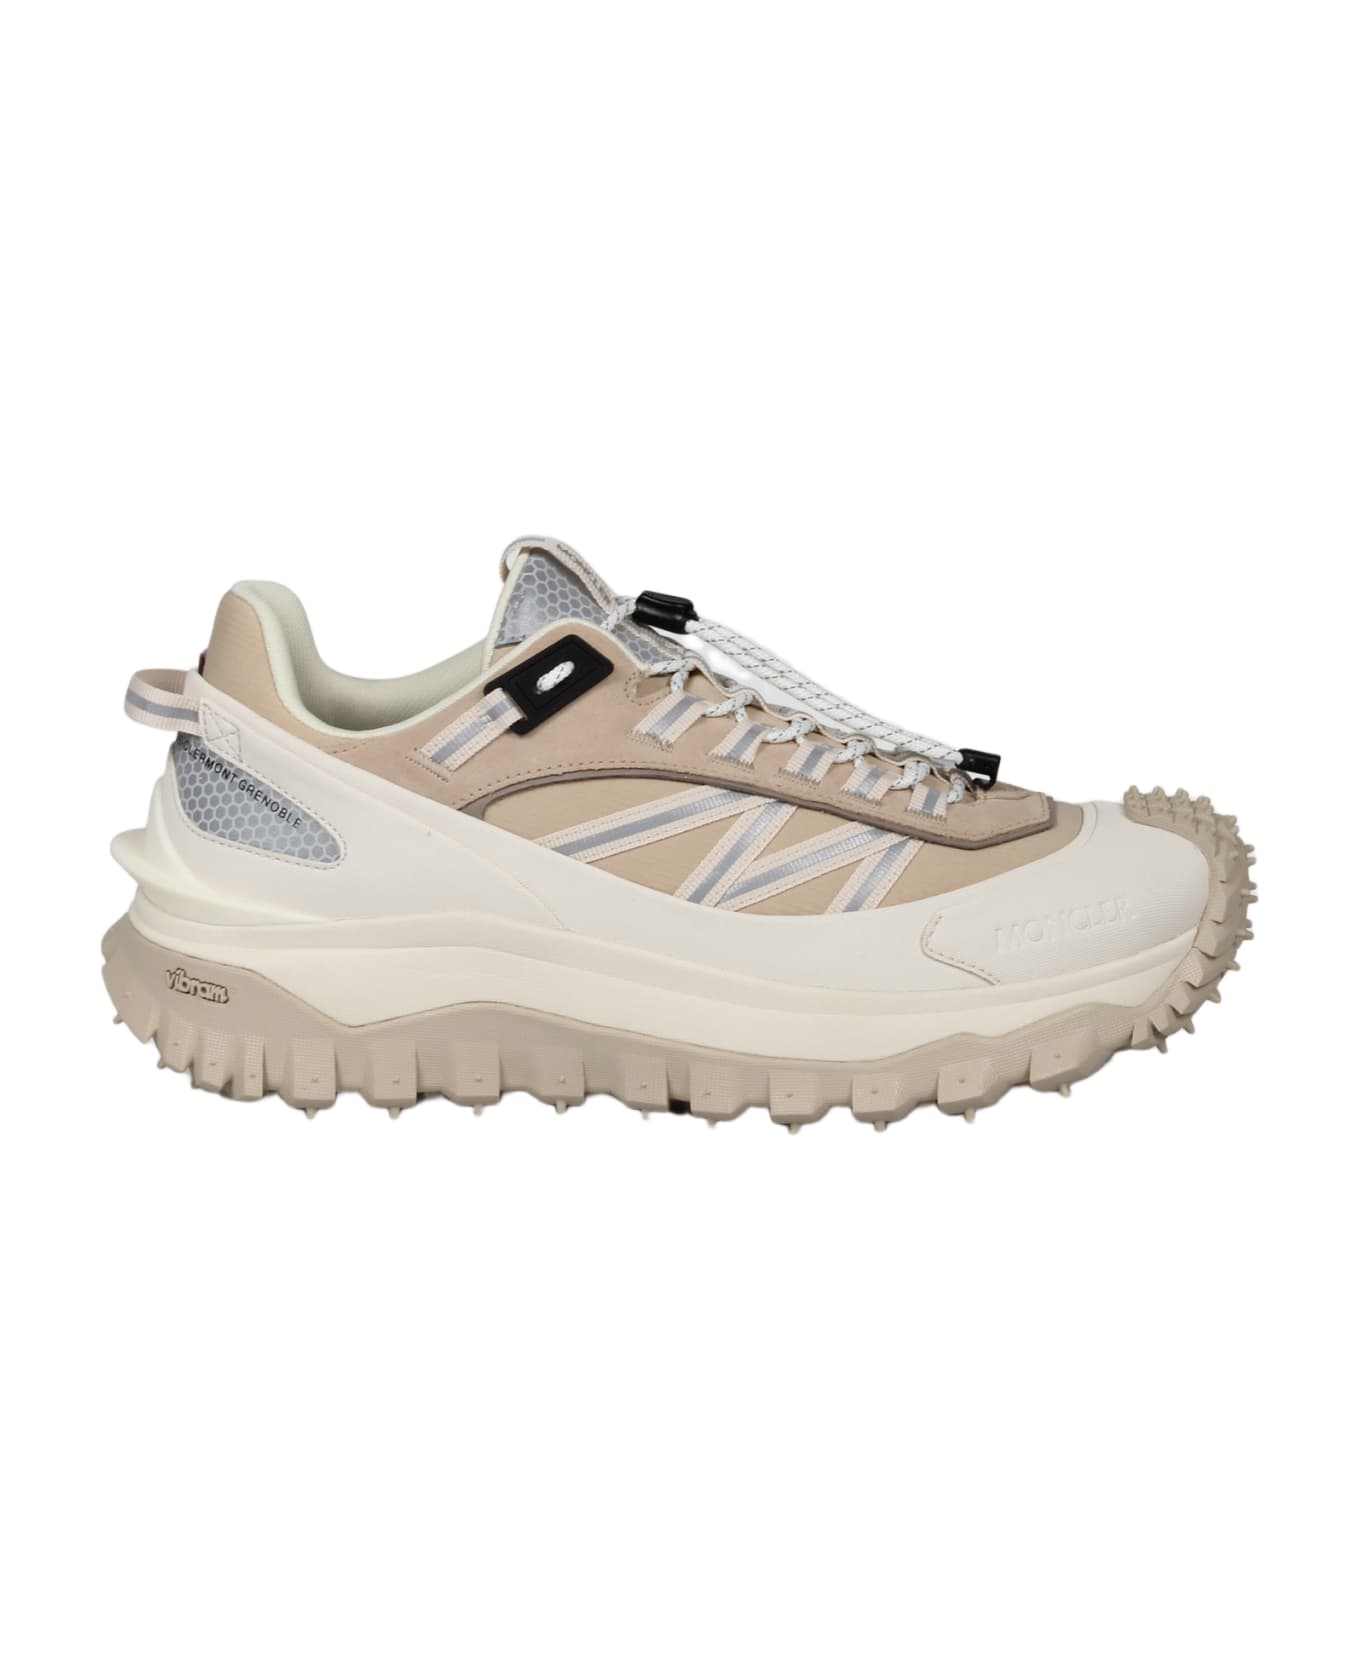 Moncler 'trailgrip' Sneakers - Nude & Neutrals